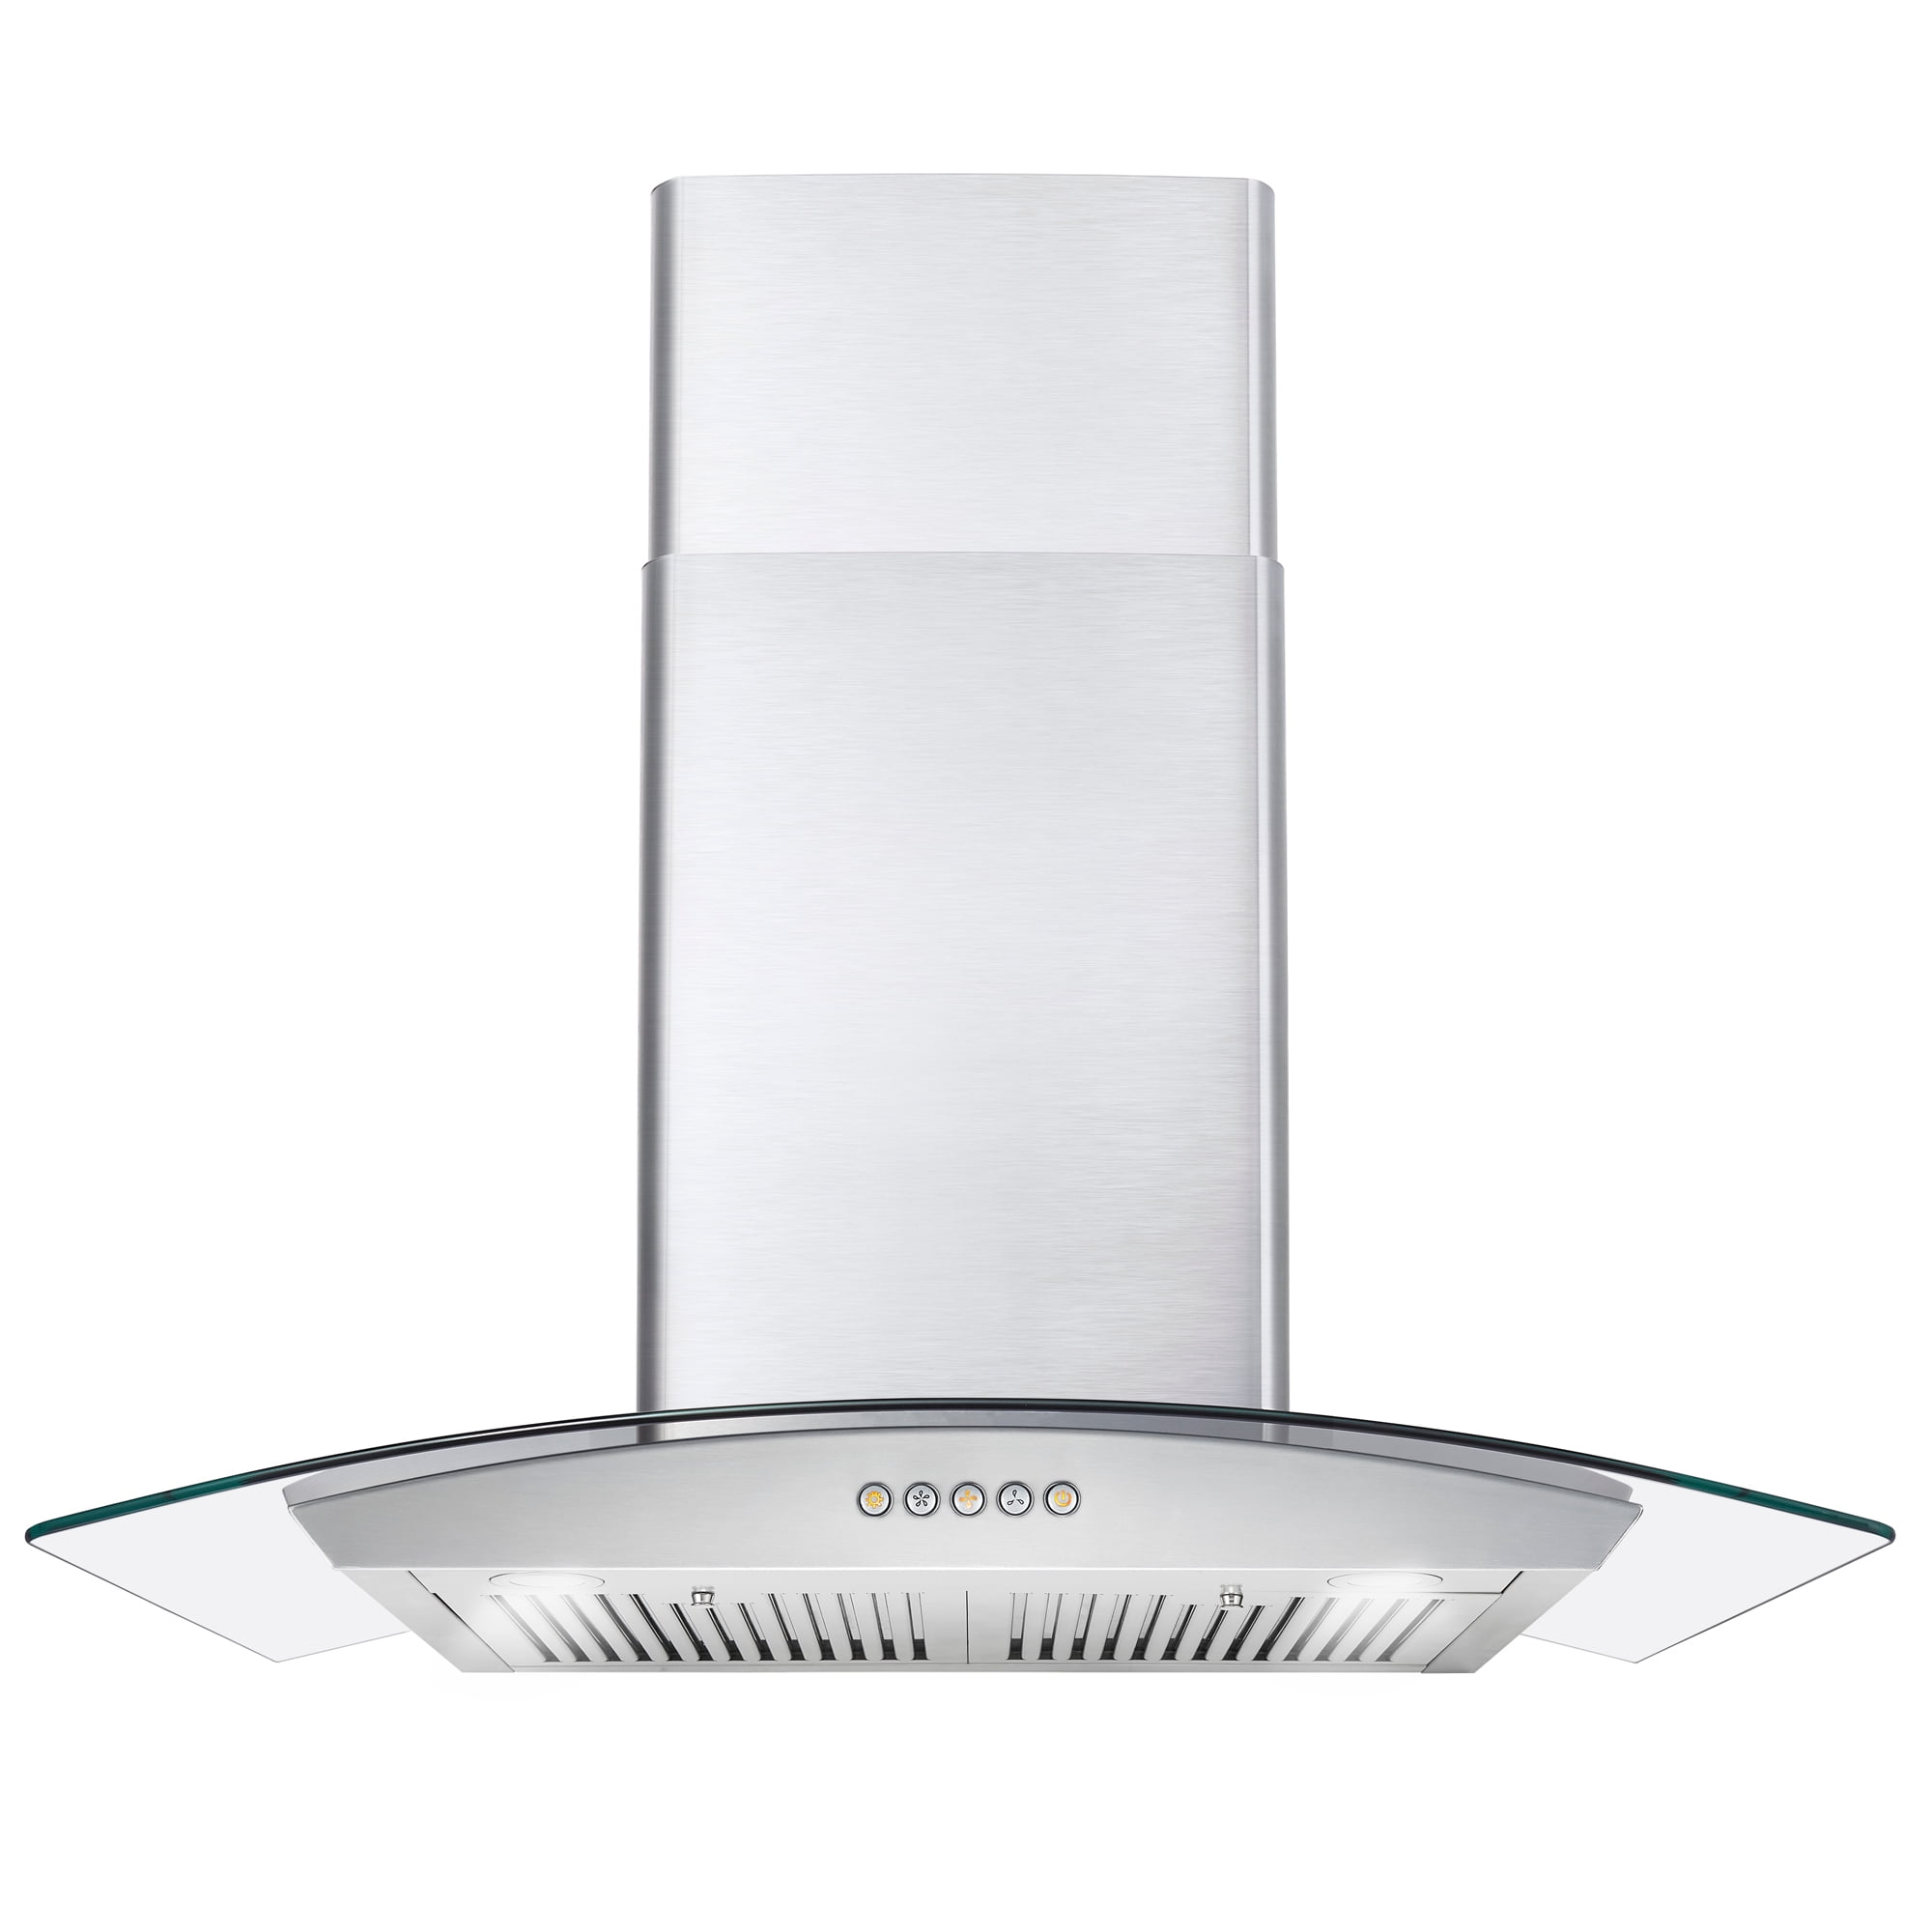 Wall Mount Range hood 30 inch Stainless Steel Stove Vent Hood with 3 Speed  Kitchen Exhaust Fan 